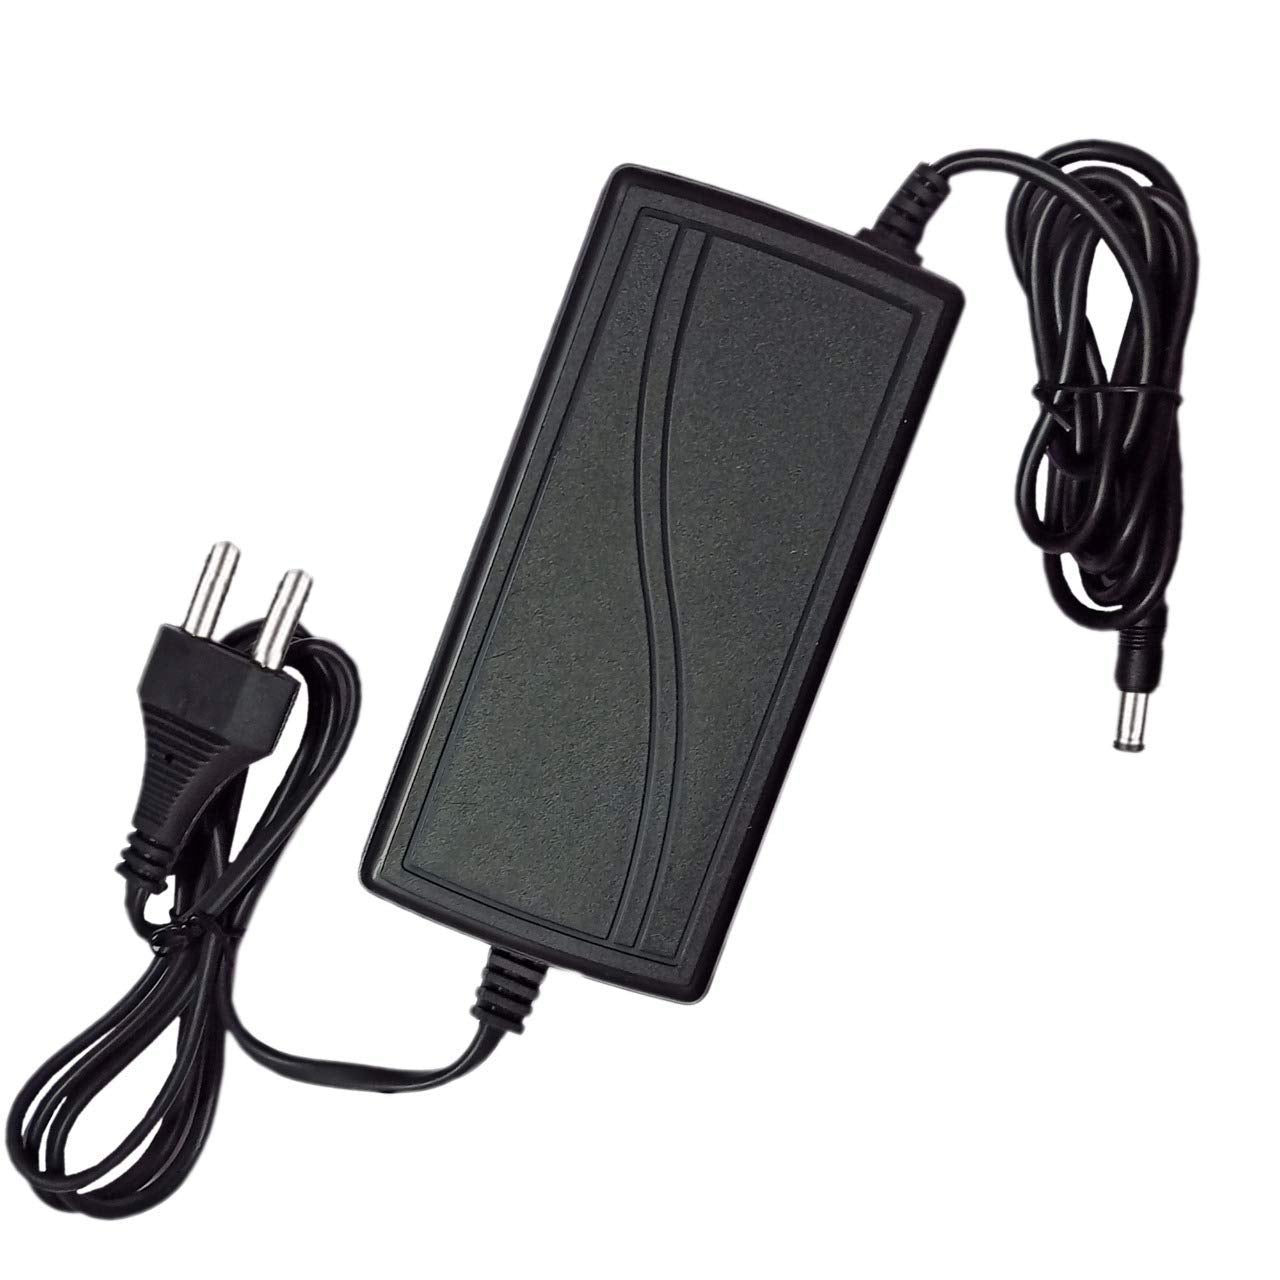 ME: 24 Volt 2.5 Amp Premium Power Supply with 2.5mm Jack 60W Adapter (Power Cord Included)